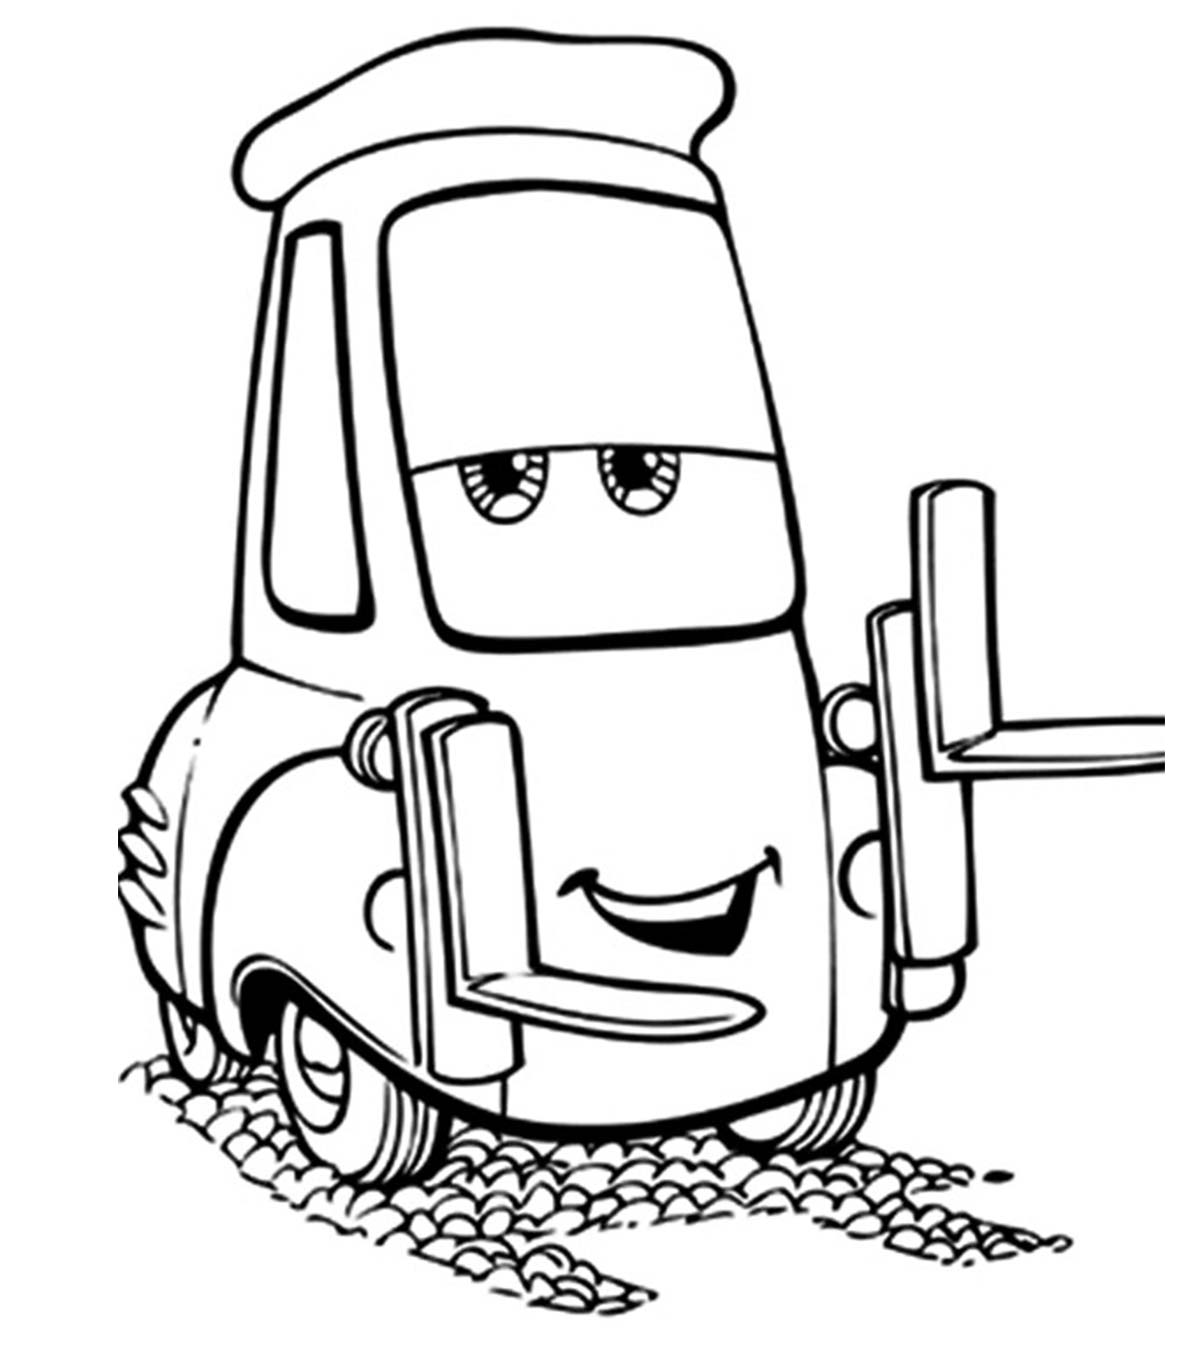 Cars Movie Coloring Pages Pdf : Cars 2 Coloring Pages Free Coloring